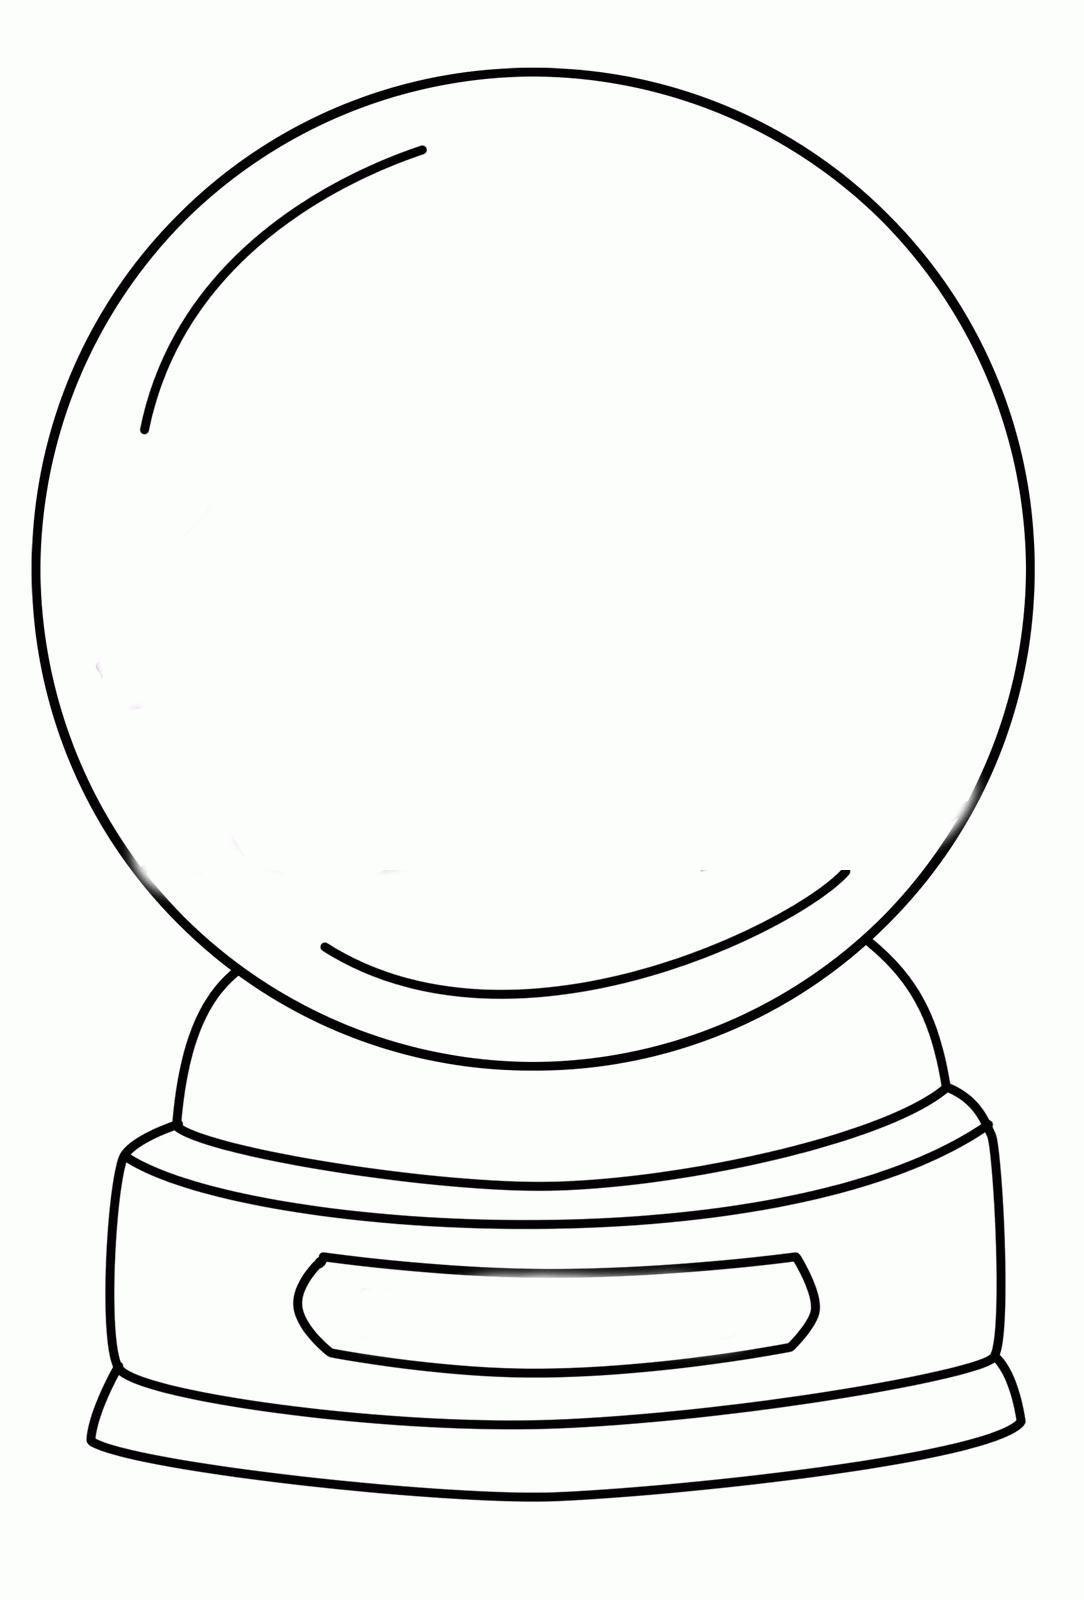 snow-globe-drawing-clip-art-library